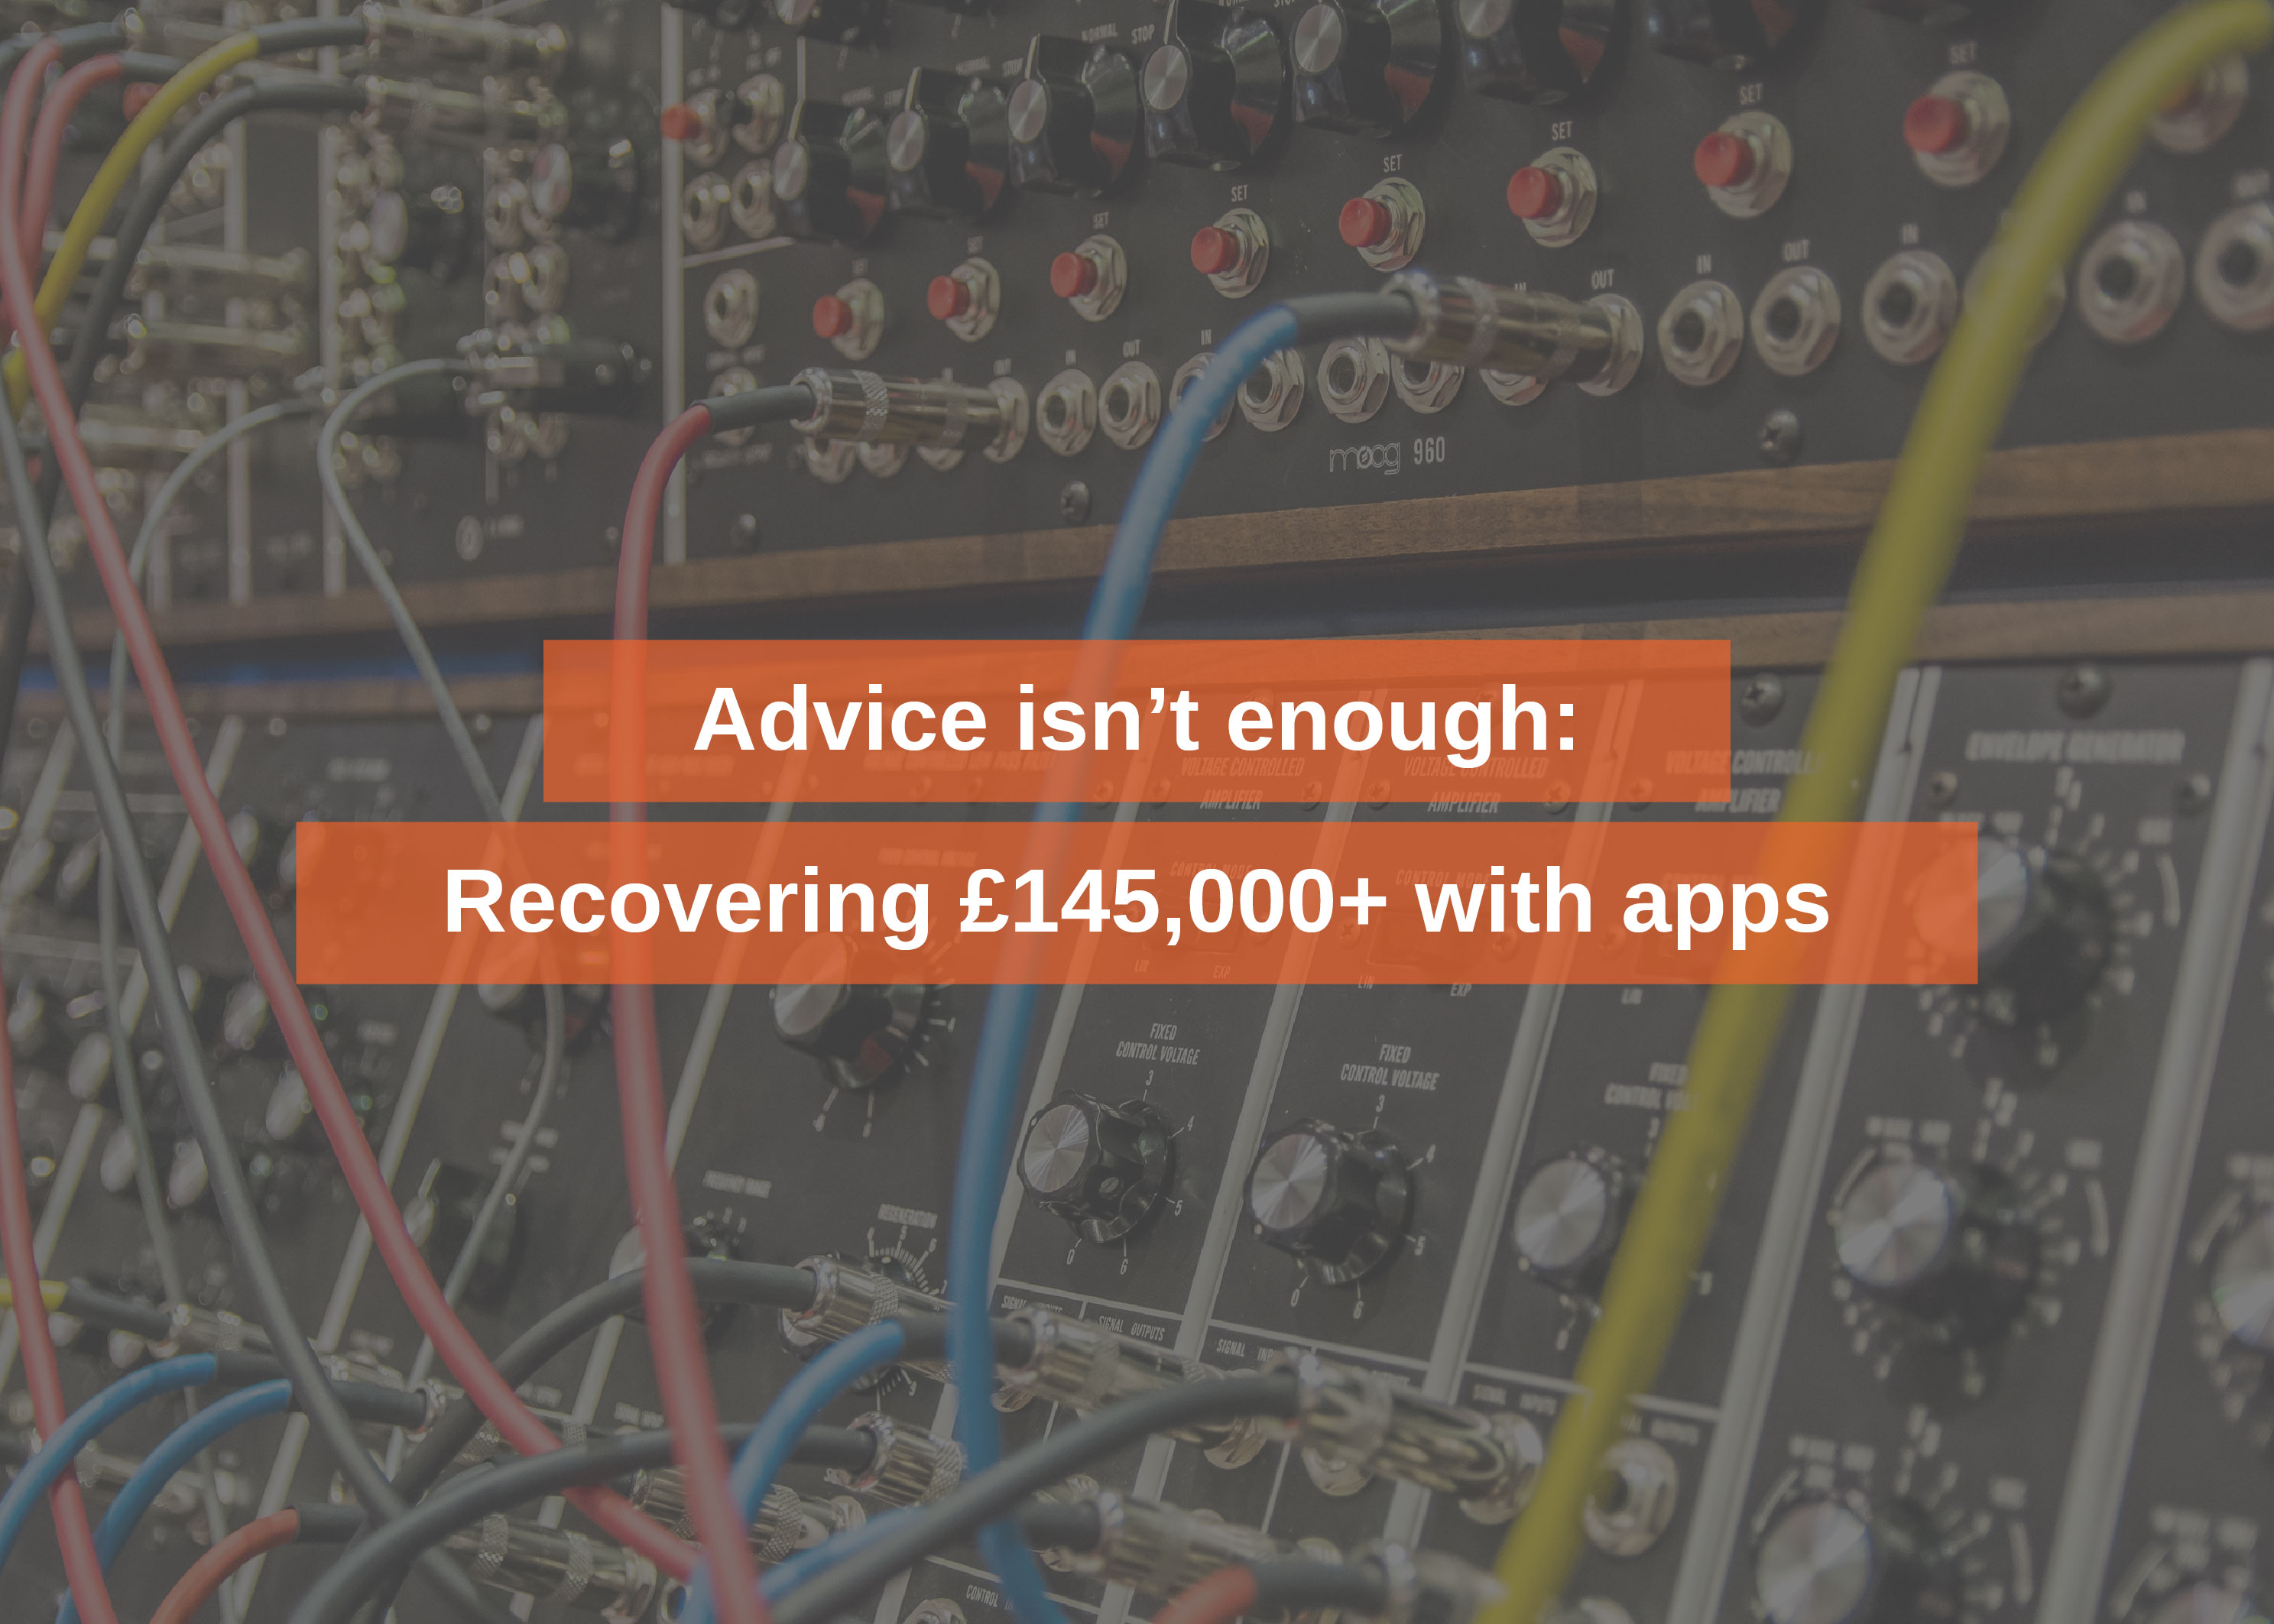 Advice isn't enough: Recovering £145,000+ with apps